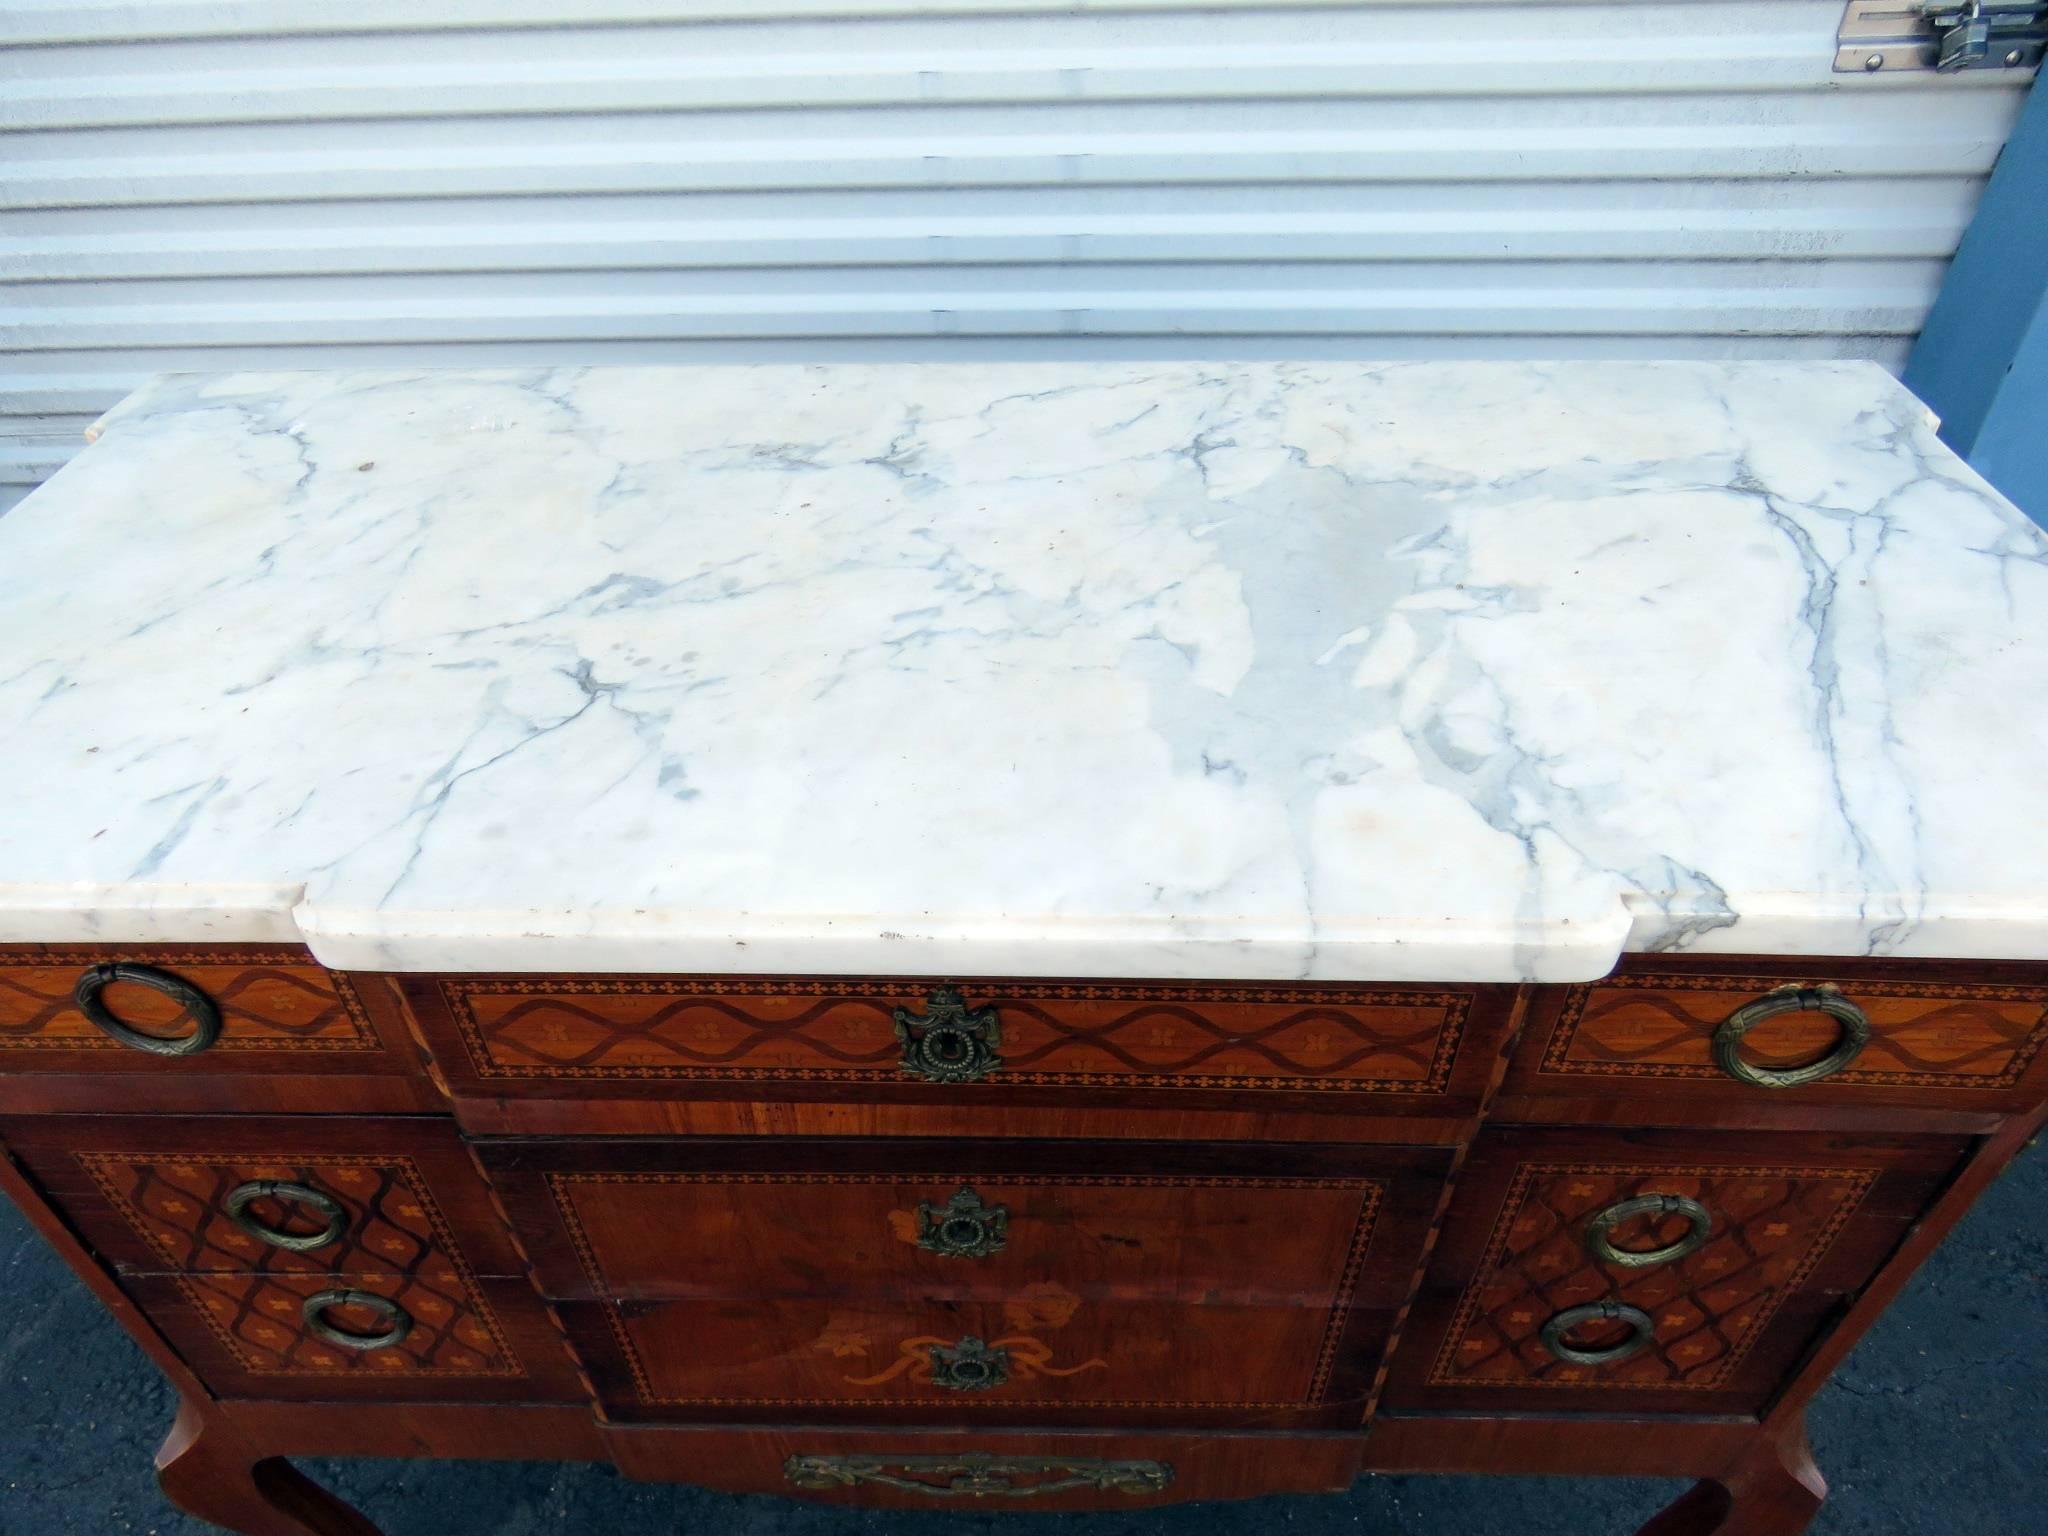 Louis XVI style parquetry inlaid marble-top commode with bronze mounts and three drawers.